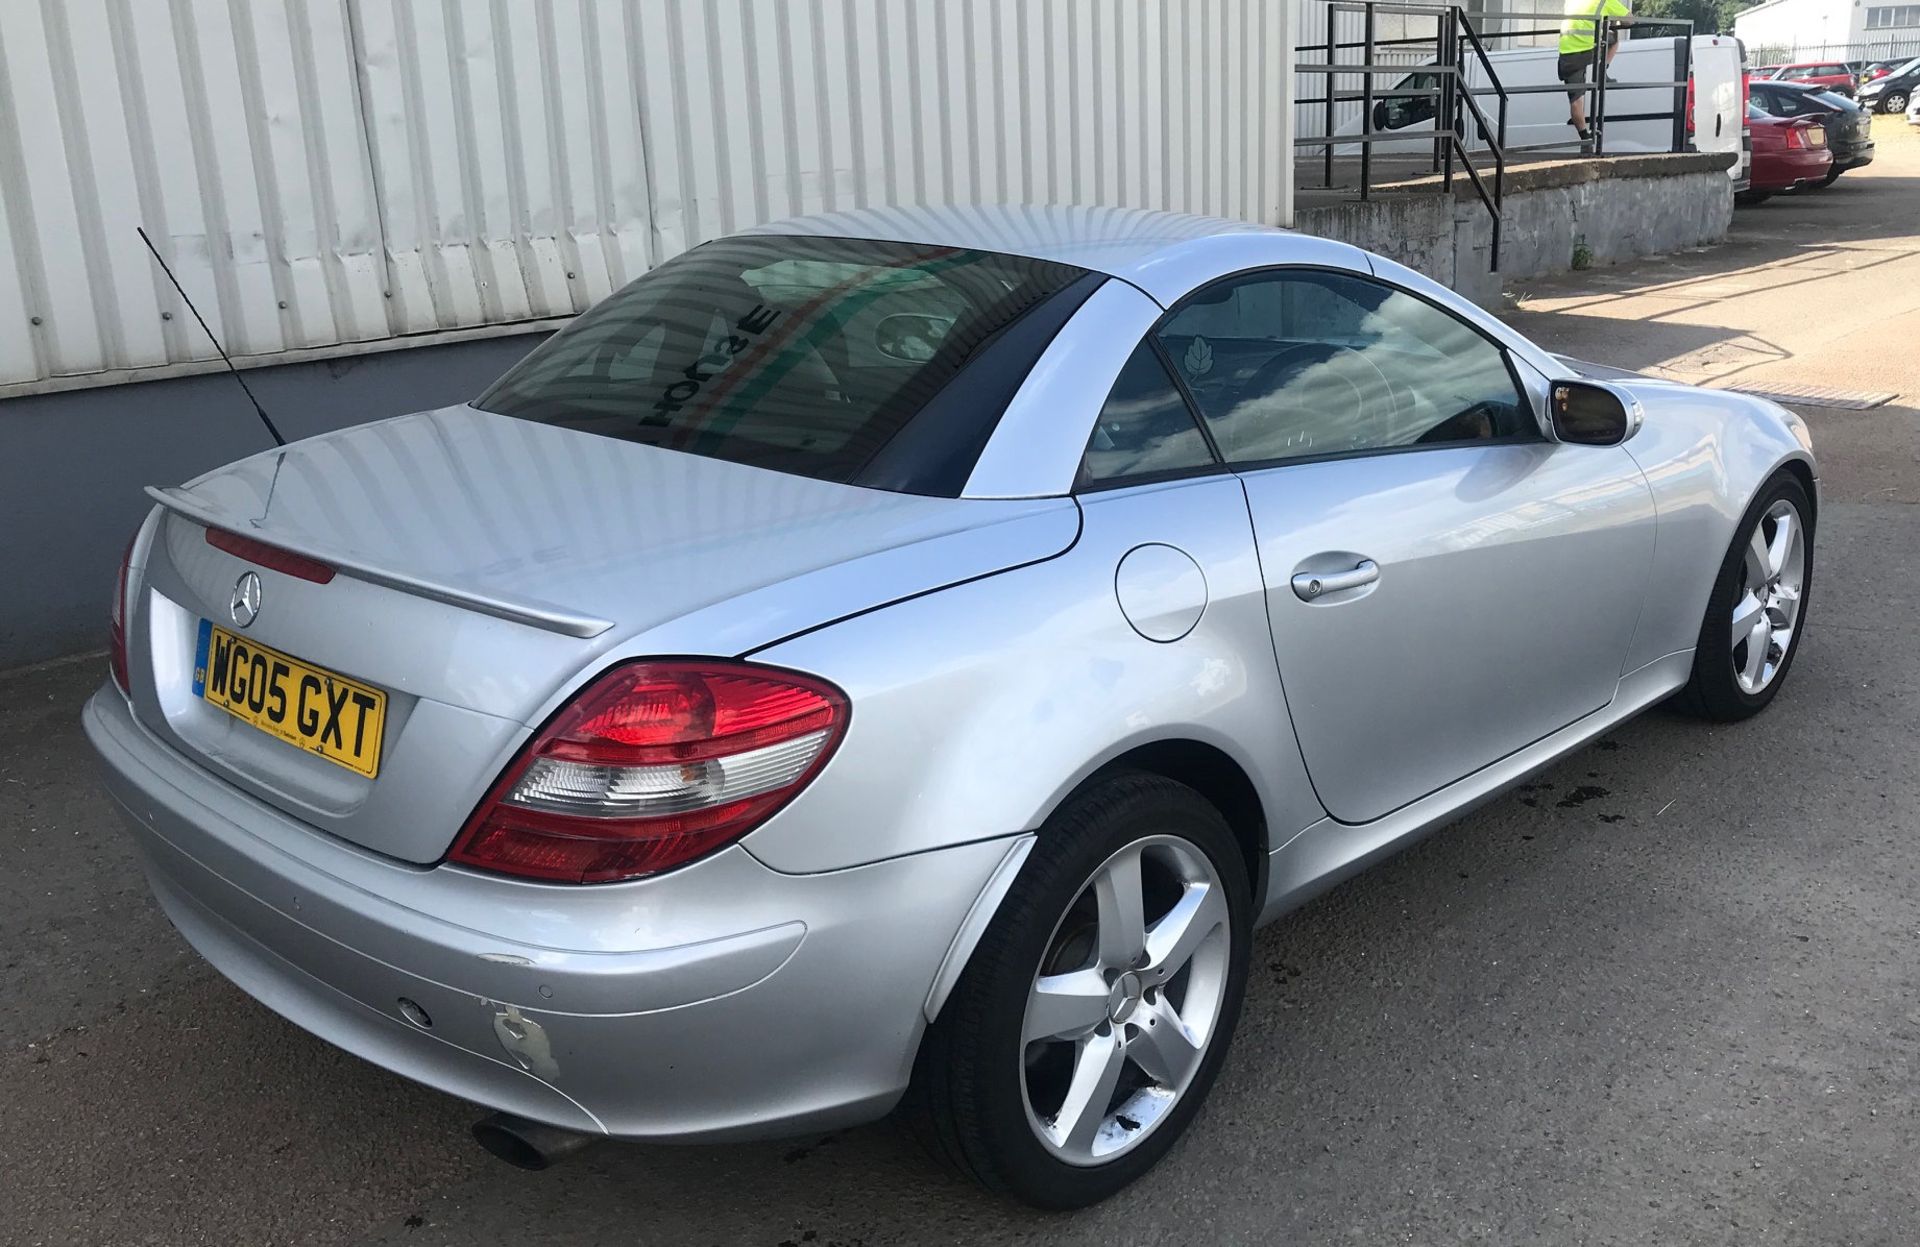 2005 Mercedes SLK 350 2 Dr Convertible - CL505 - NO VAT ON THE HAMMER - Location: Corby, N - Image 4 of 11